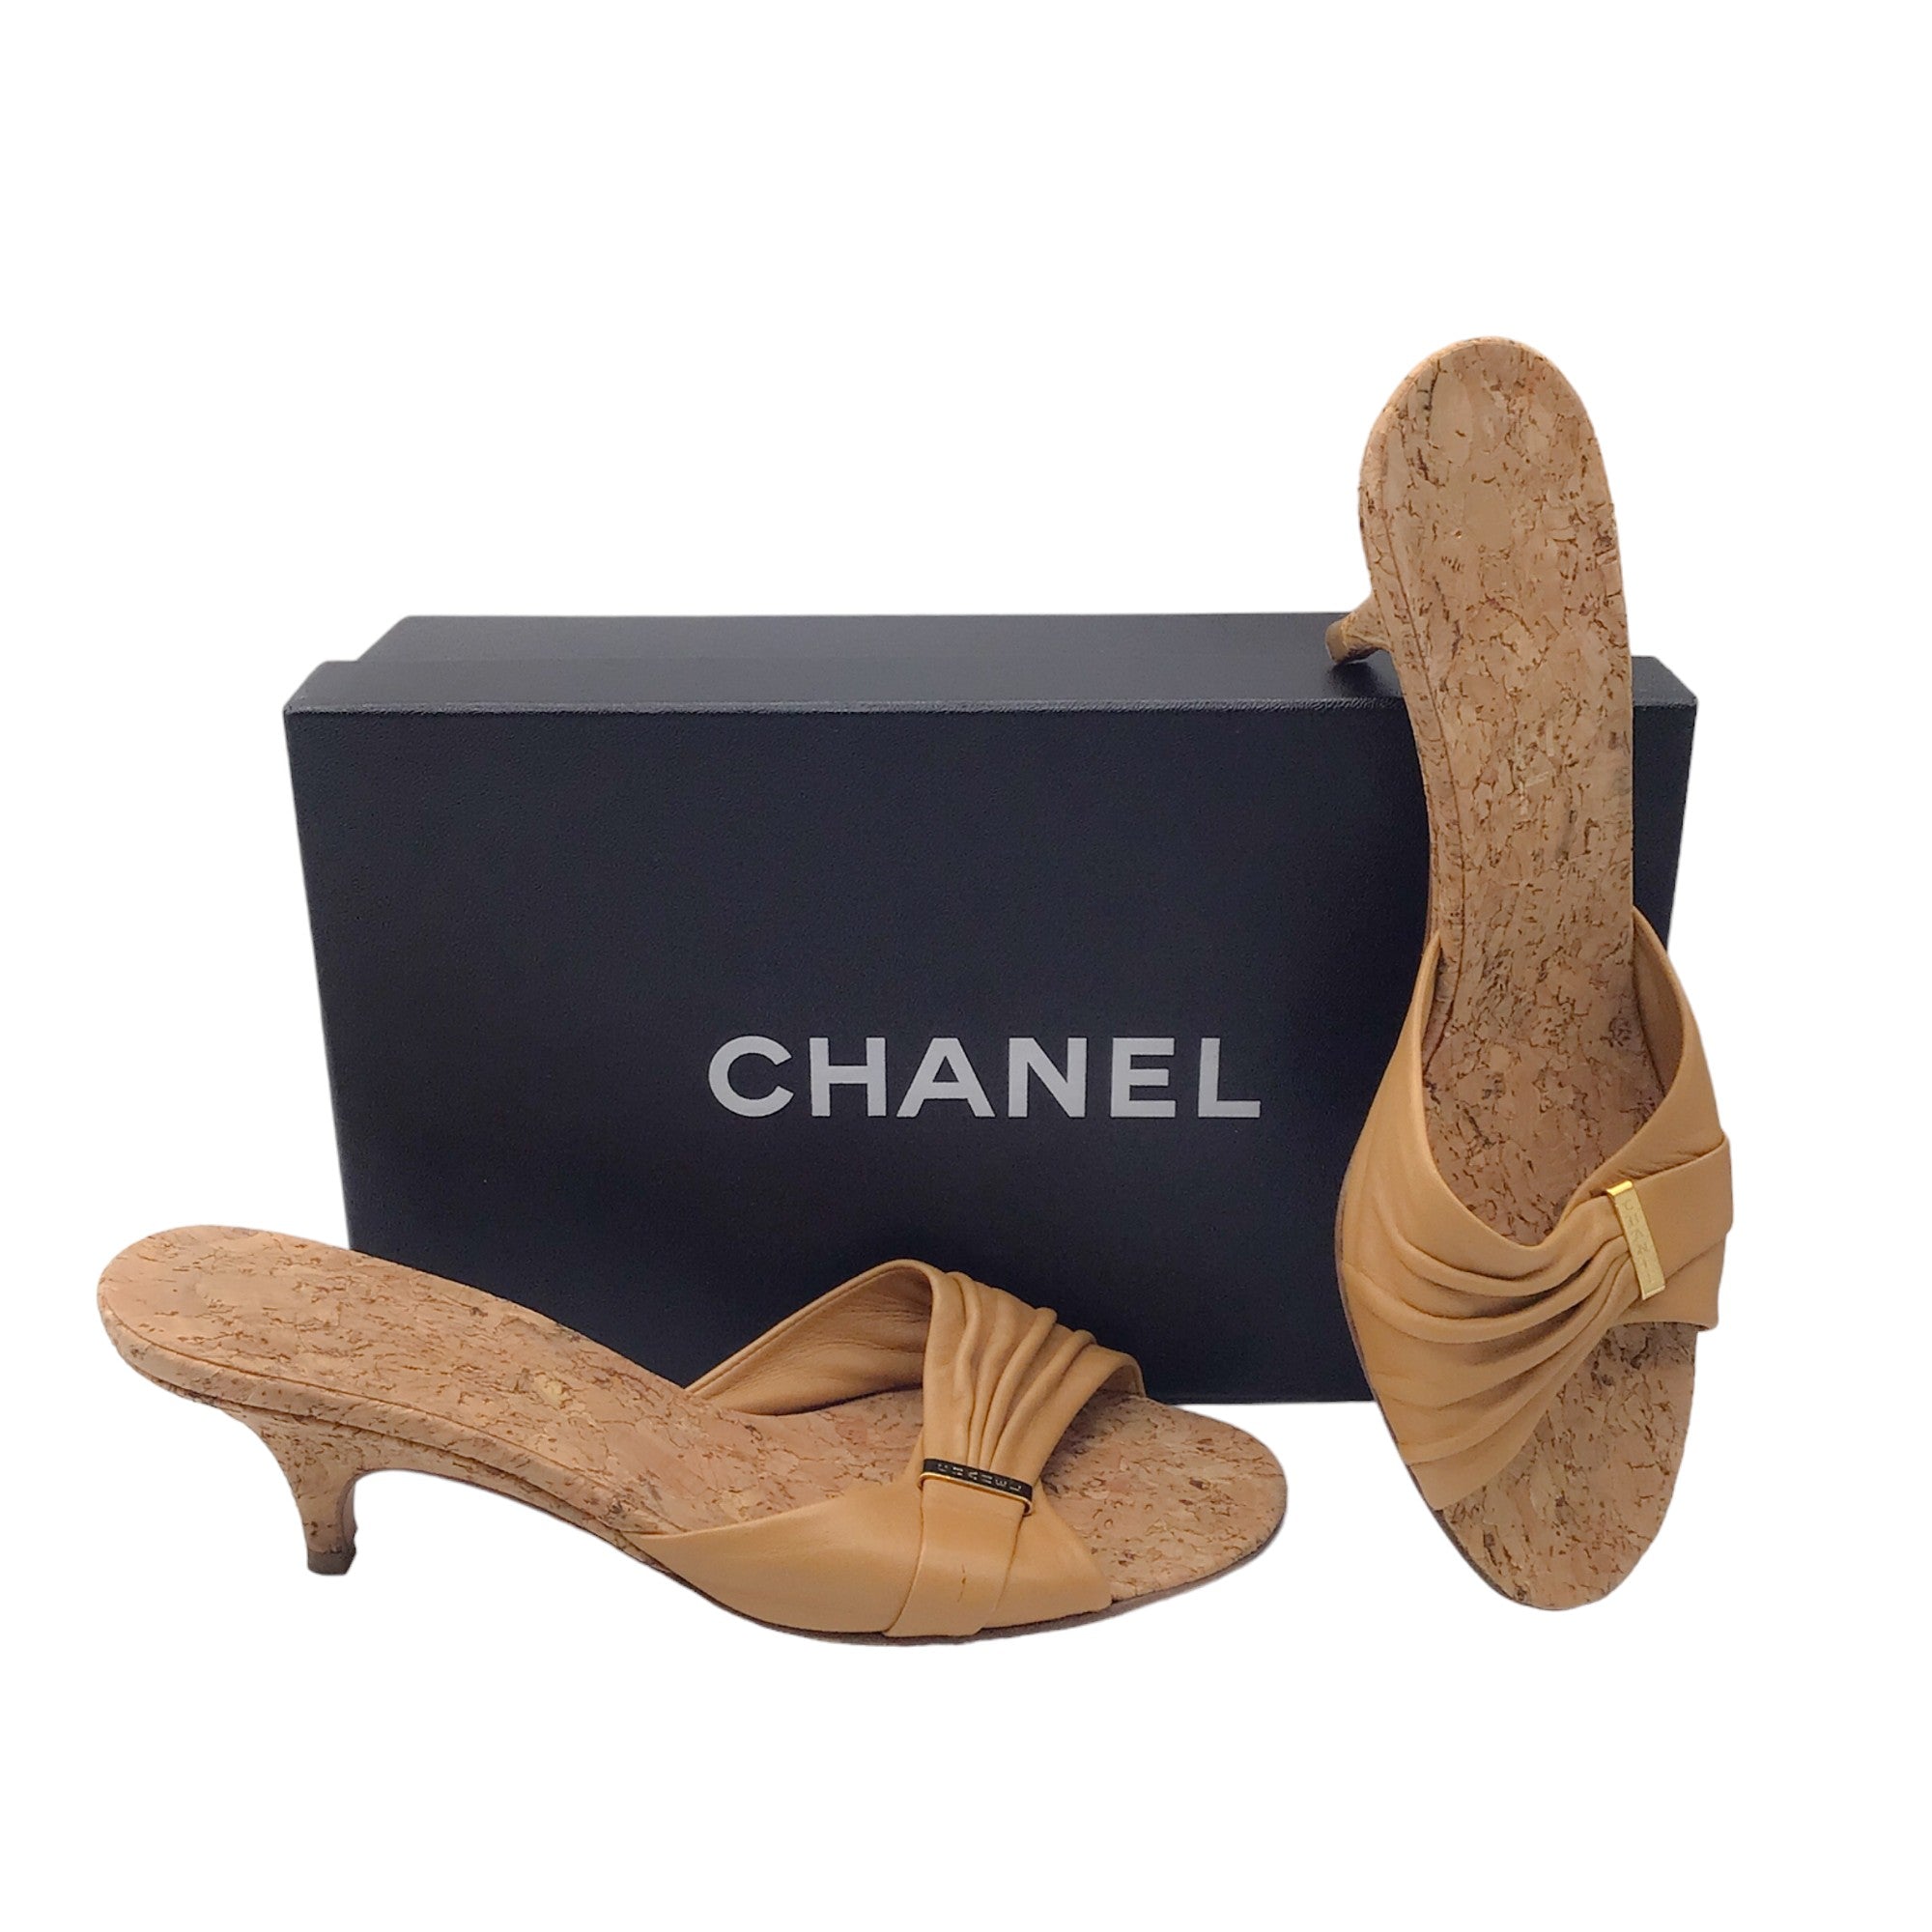 Chanel Tan Leather and Cork Kitten Heel Sandals